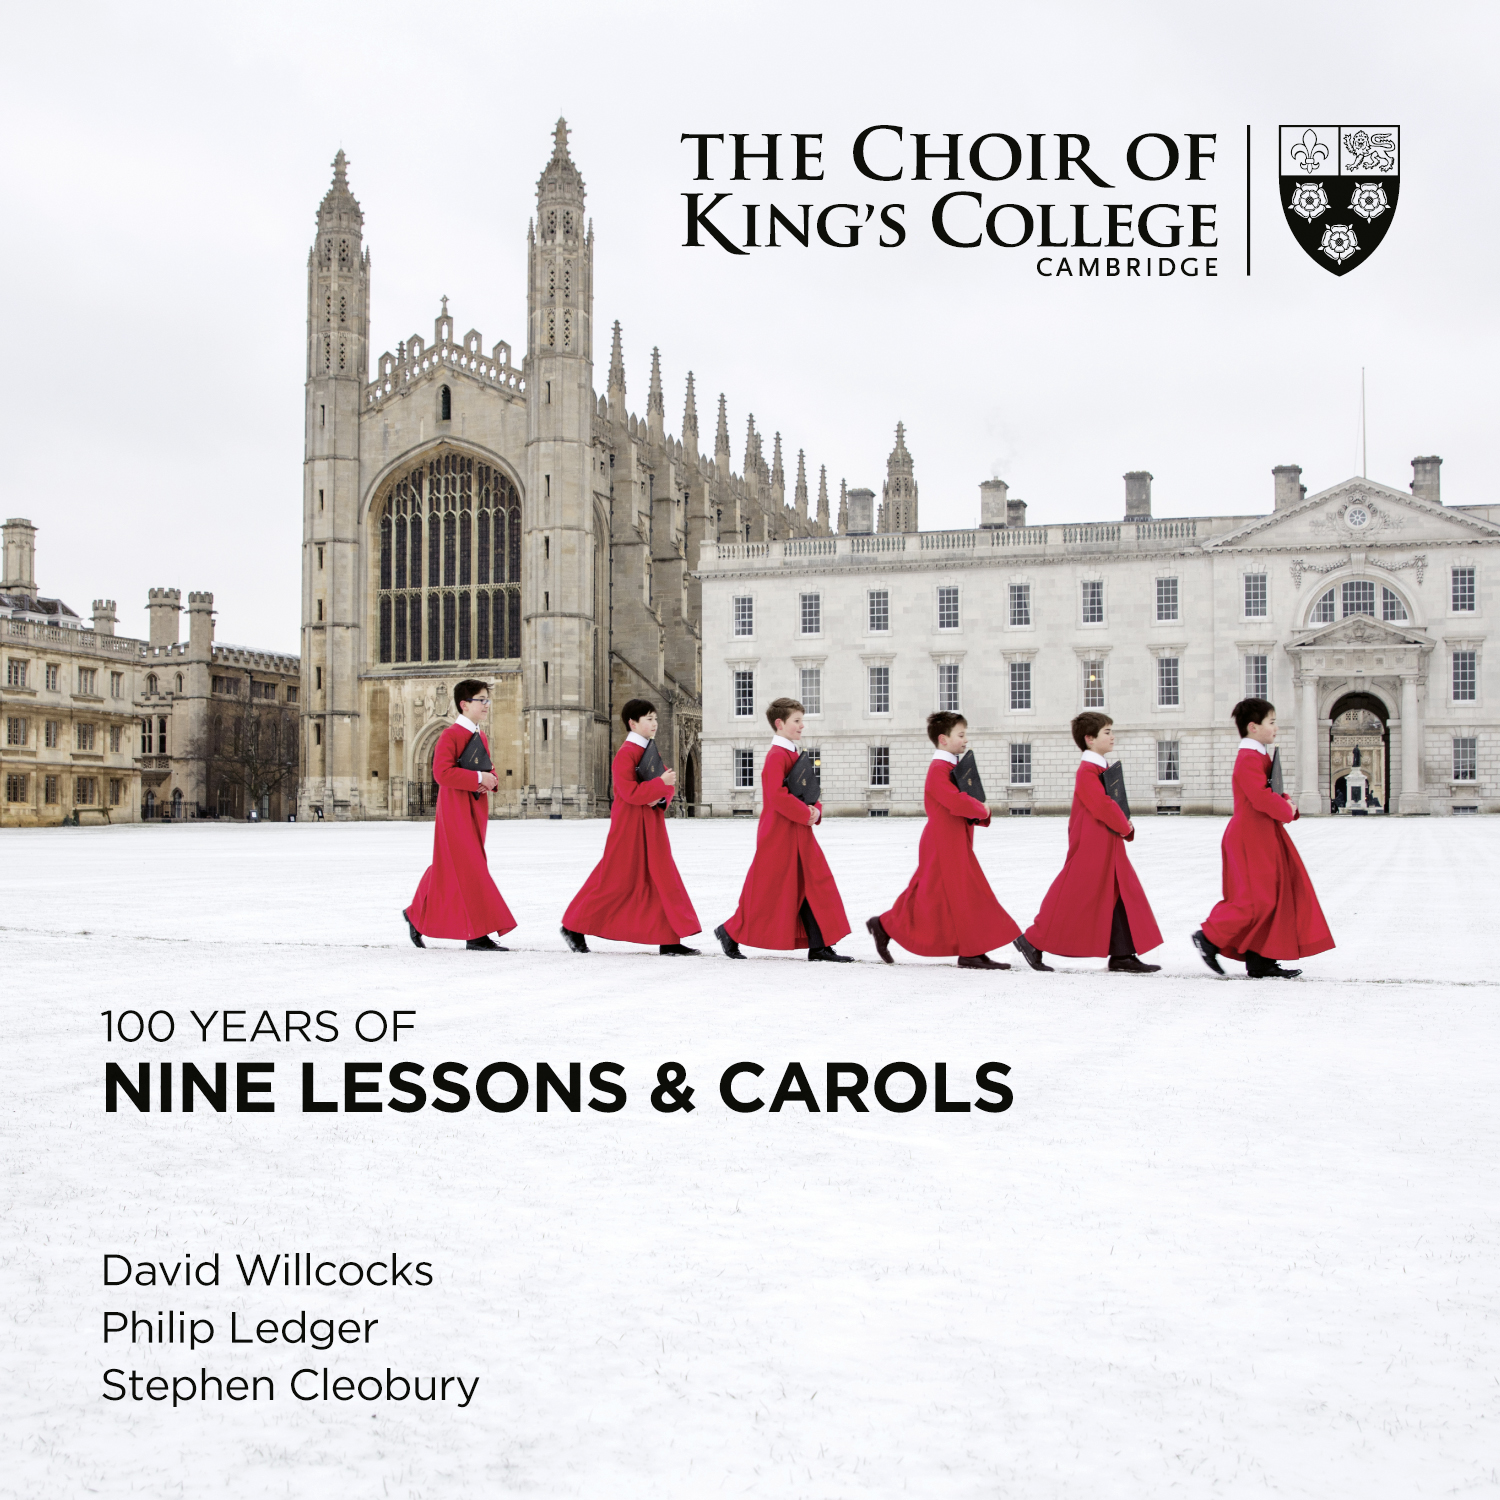 100 Years of Nine Lessons & Carols King's College Cambridge